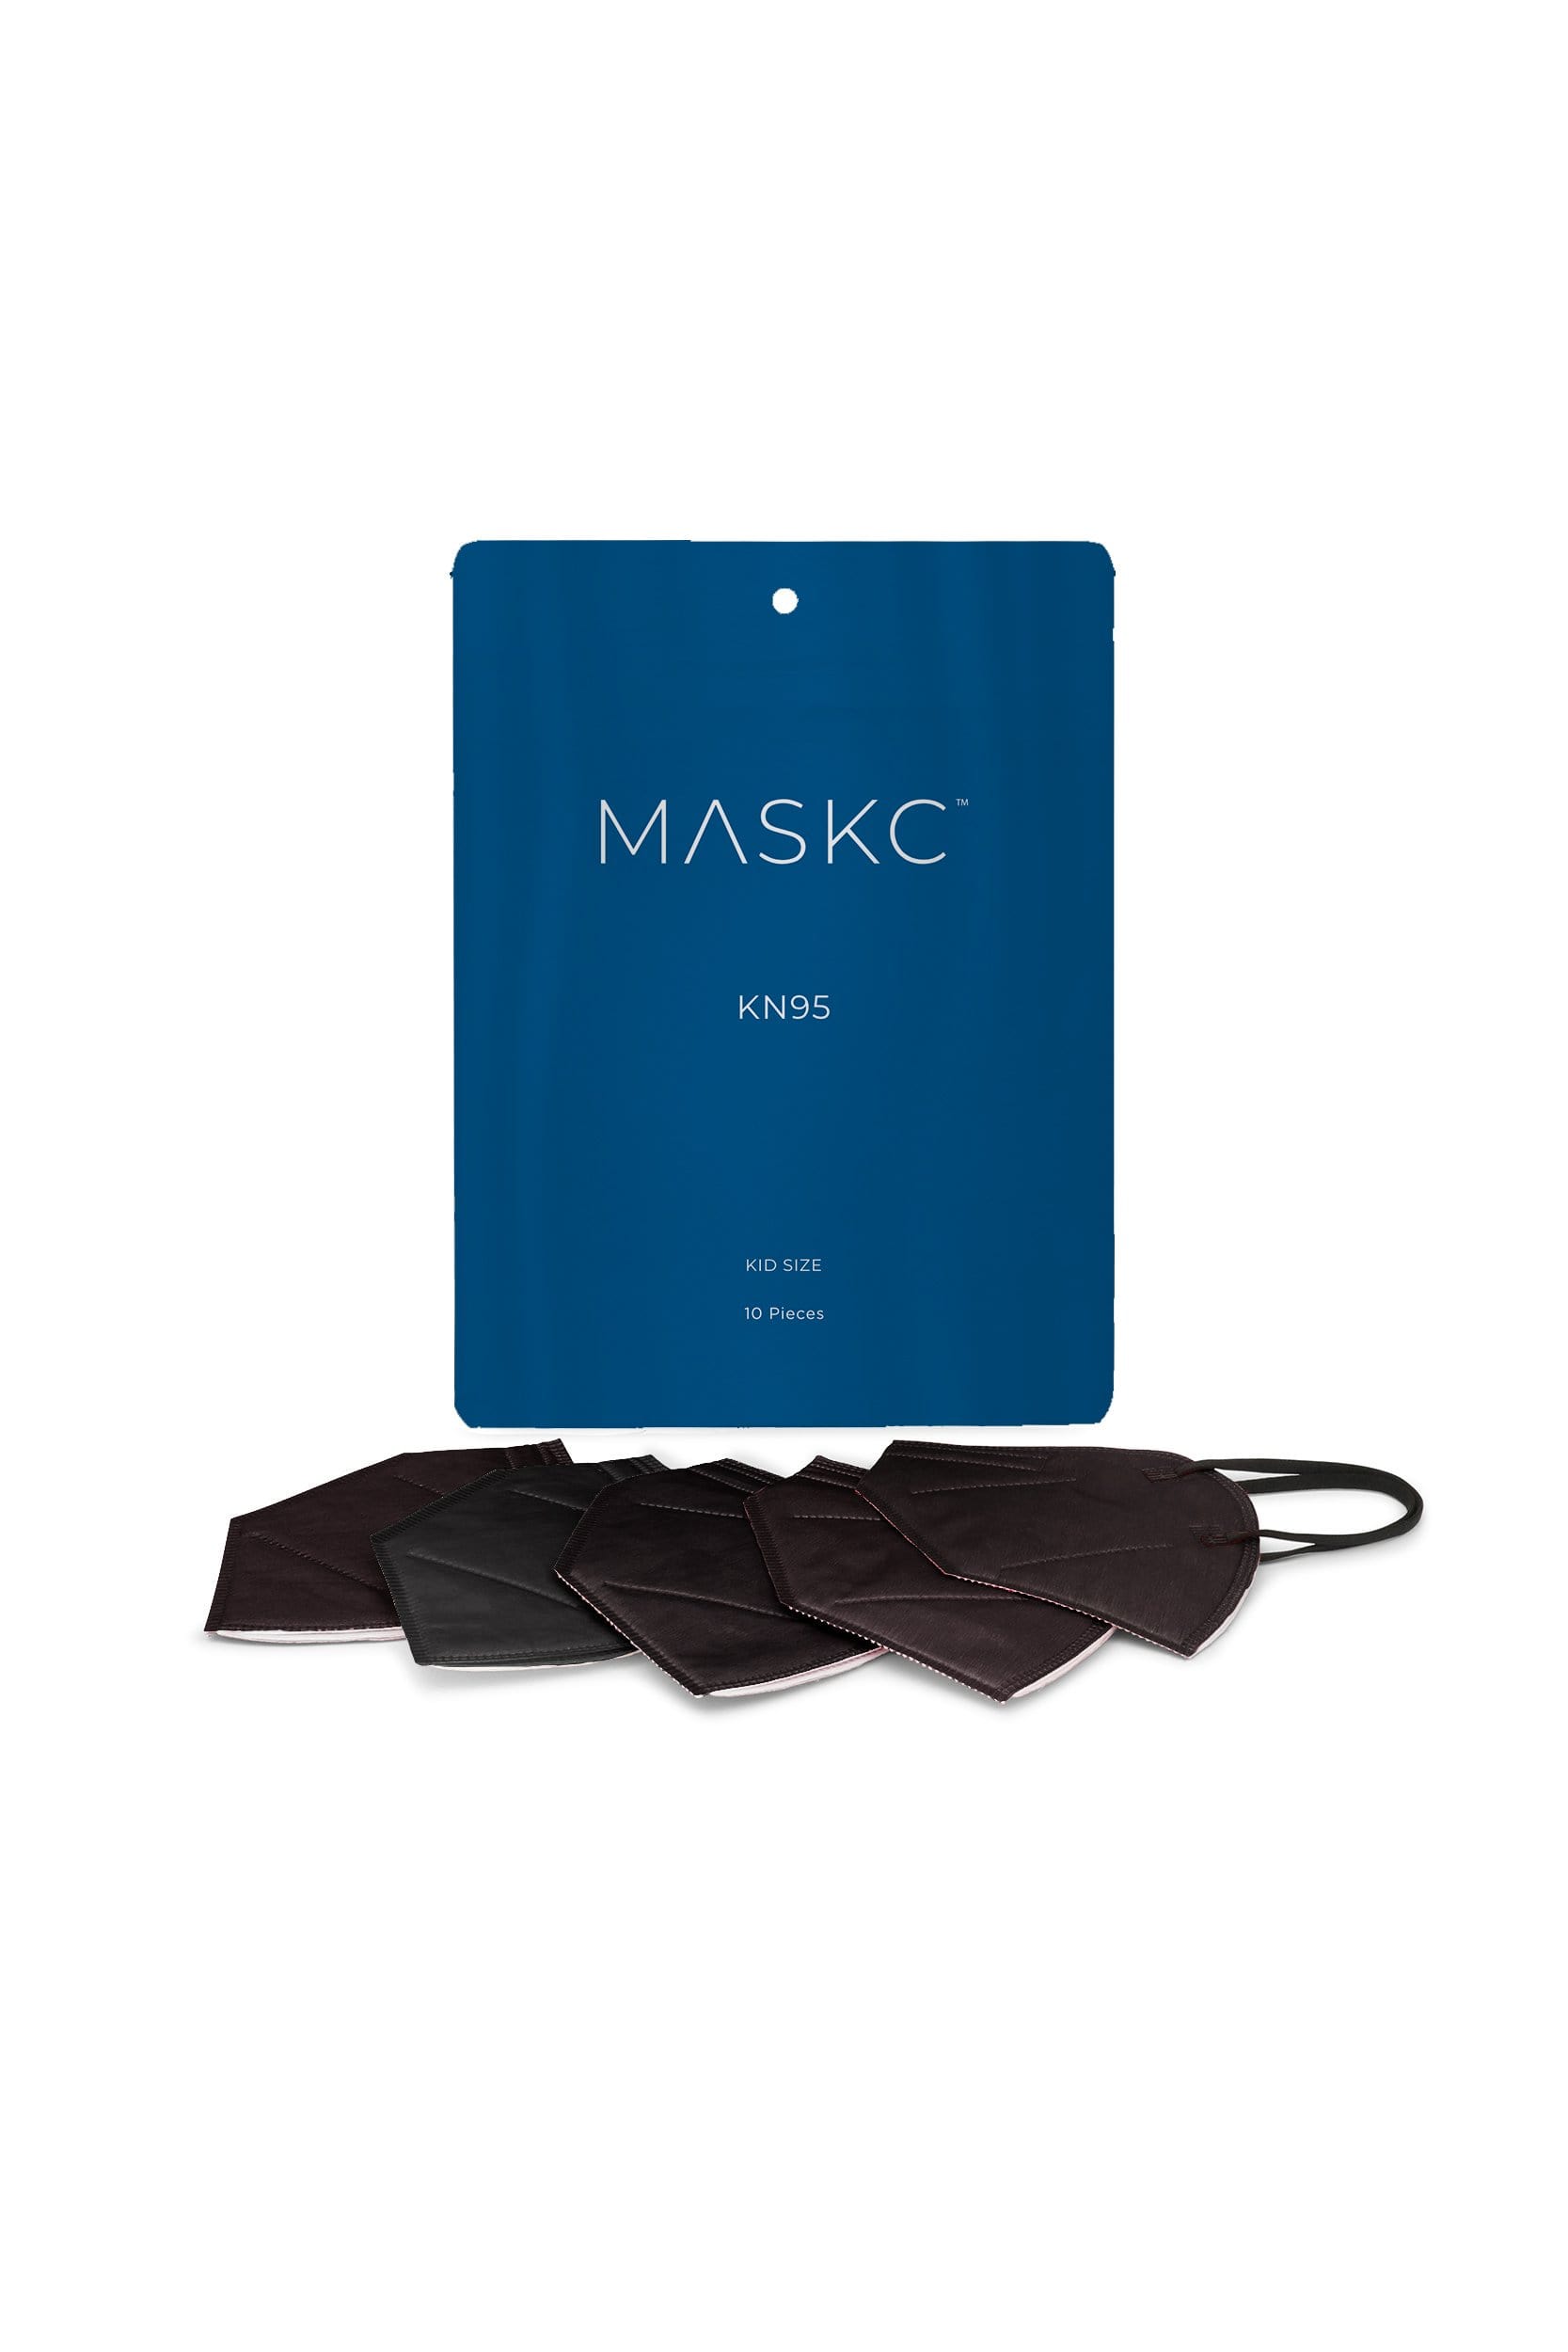 Pack of Kids Black KN95 face masks. Each pack contains stylish high quality face masks. 